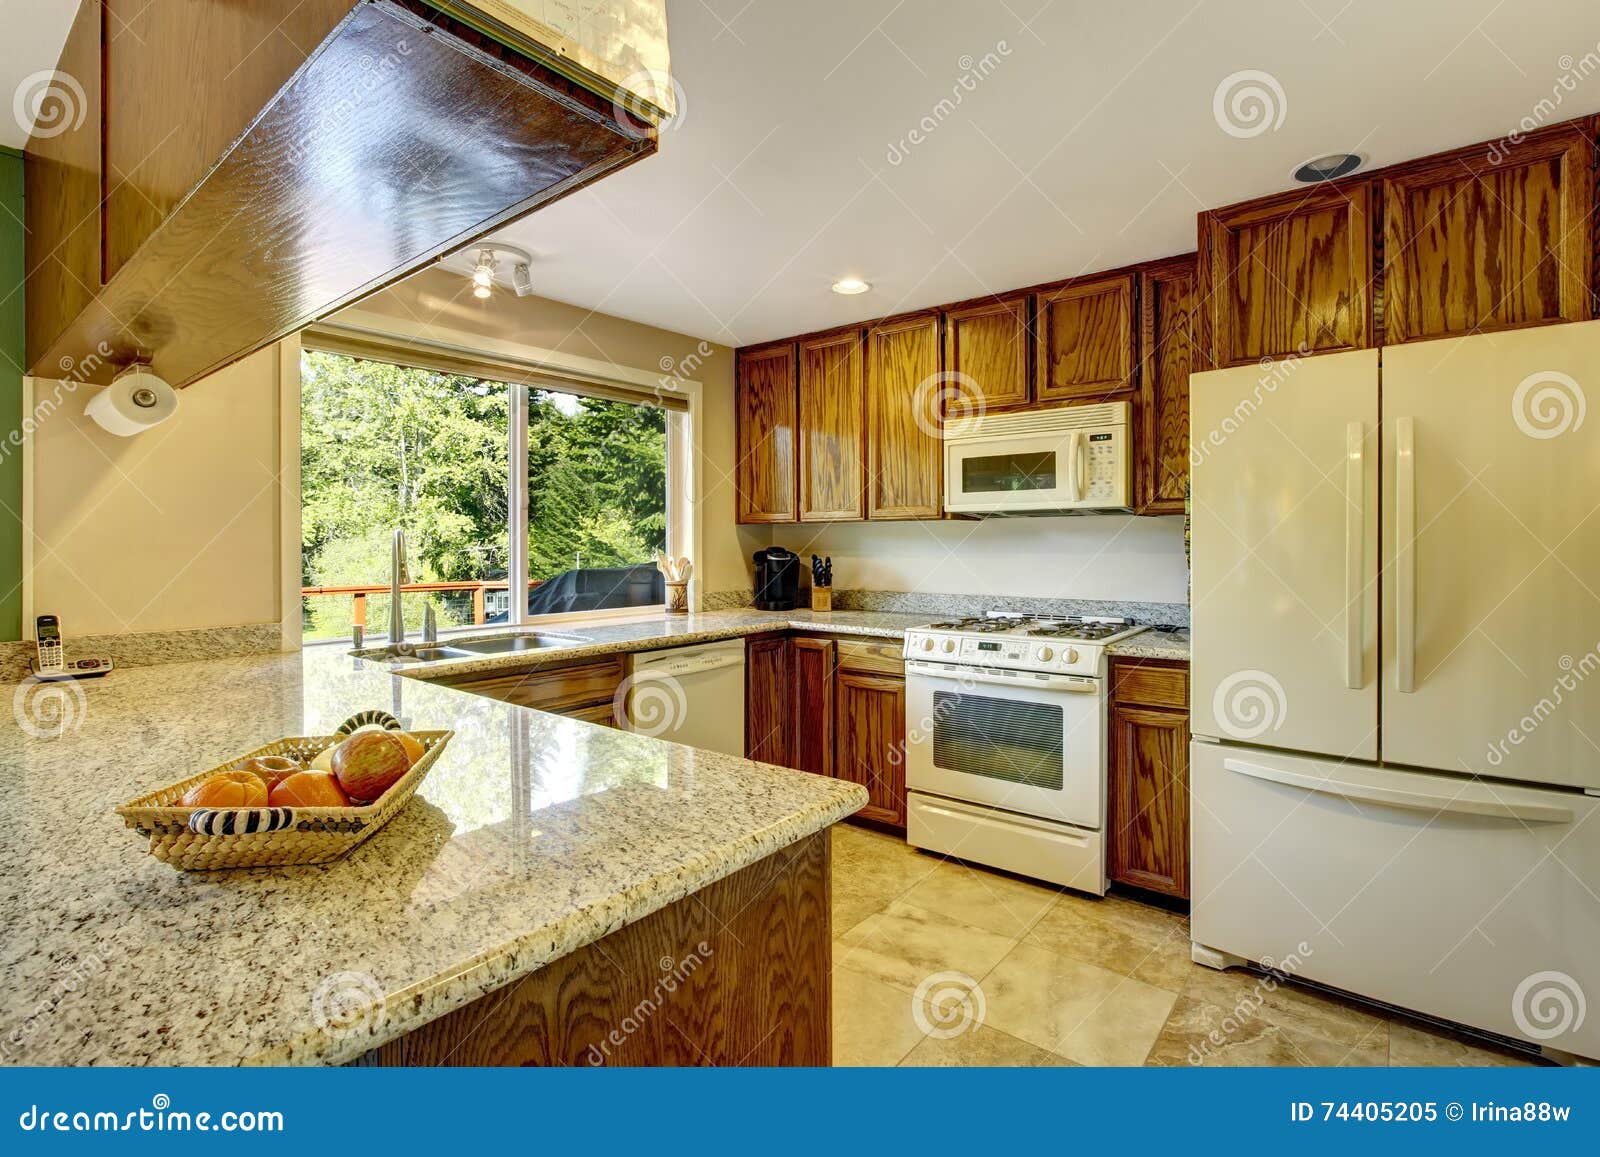 View Of Kitchen Room With Hardwood Cabinets And Tile Flooring